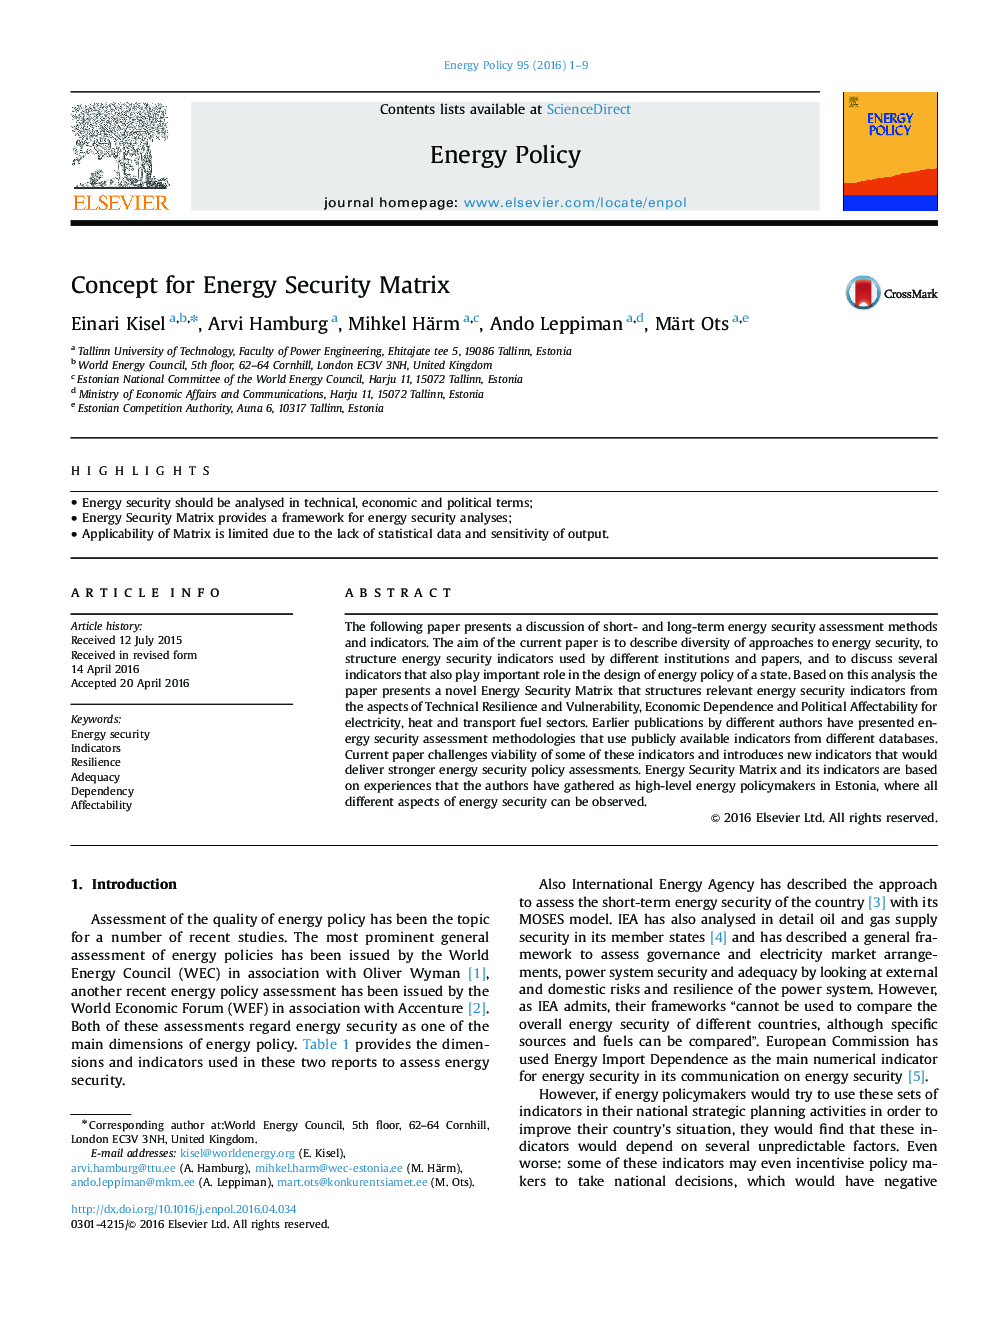 Concept for Energy Security Matrix